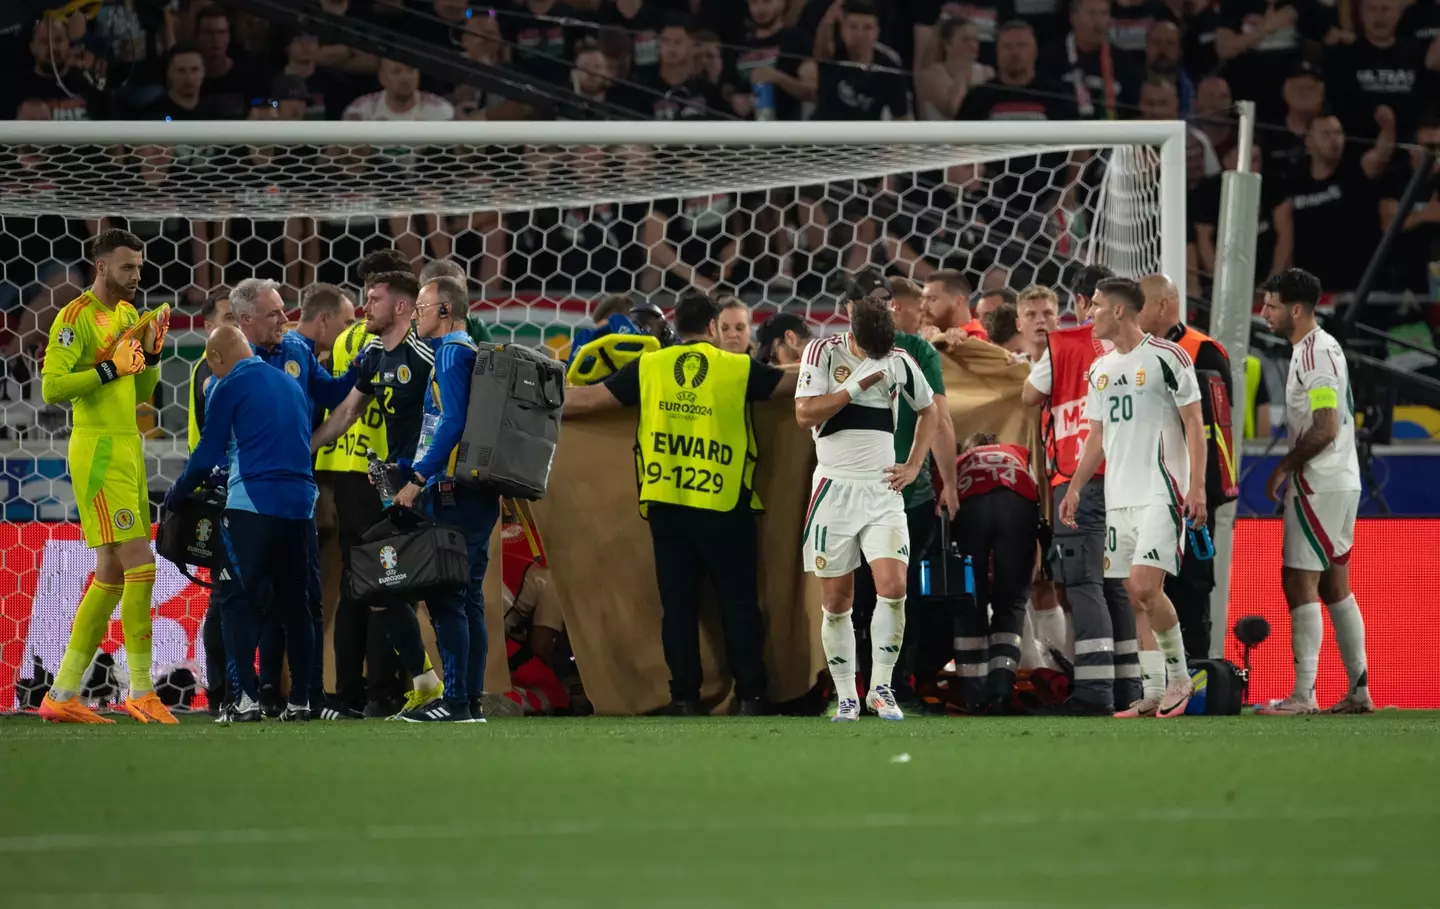 Players formed a protective wall around the striker as medics got to work on him. (Joe Prior/Visionhaus via Getty Images)